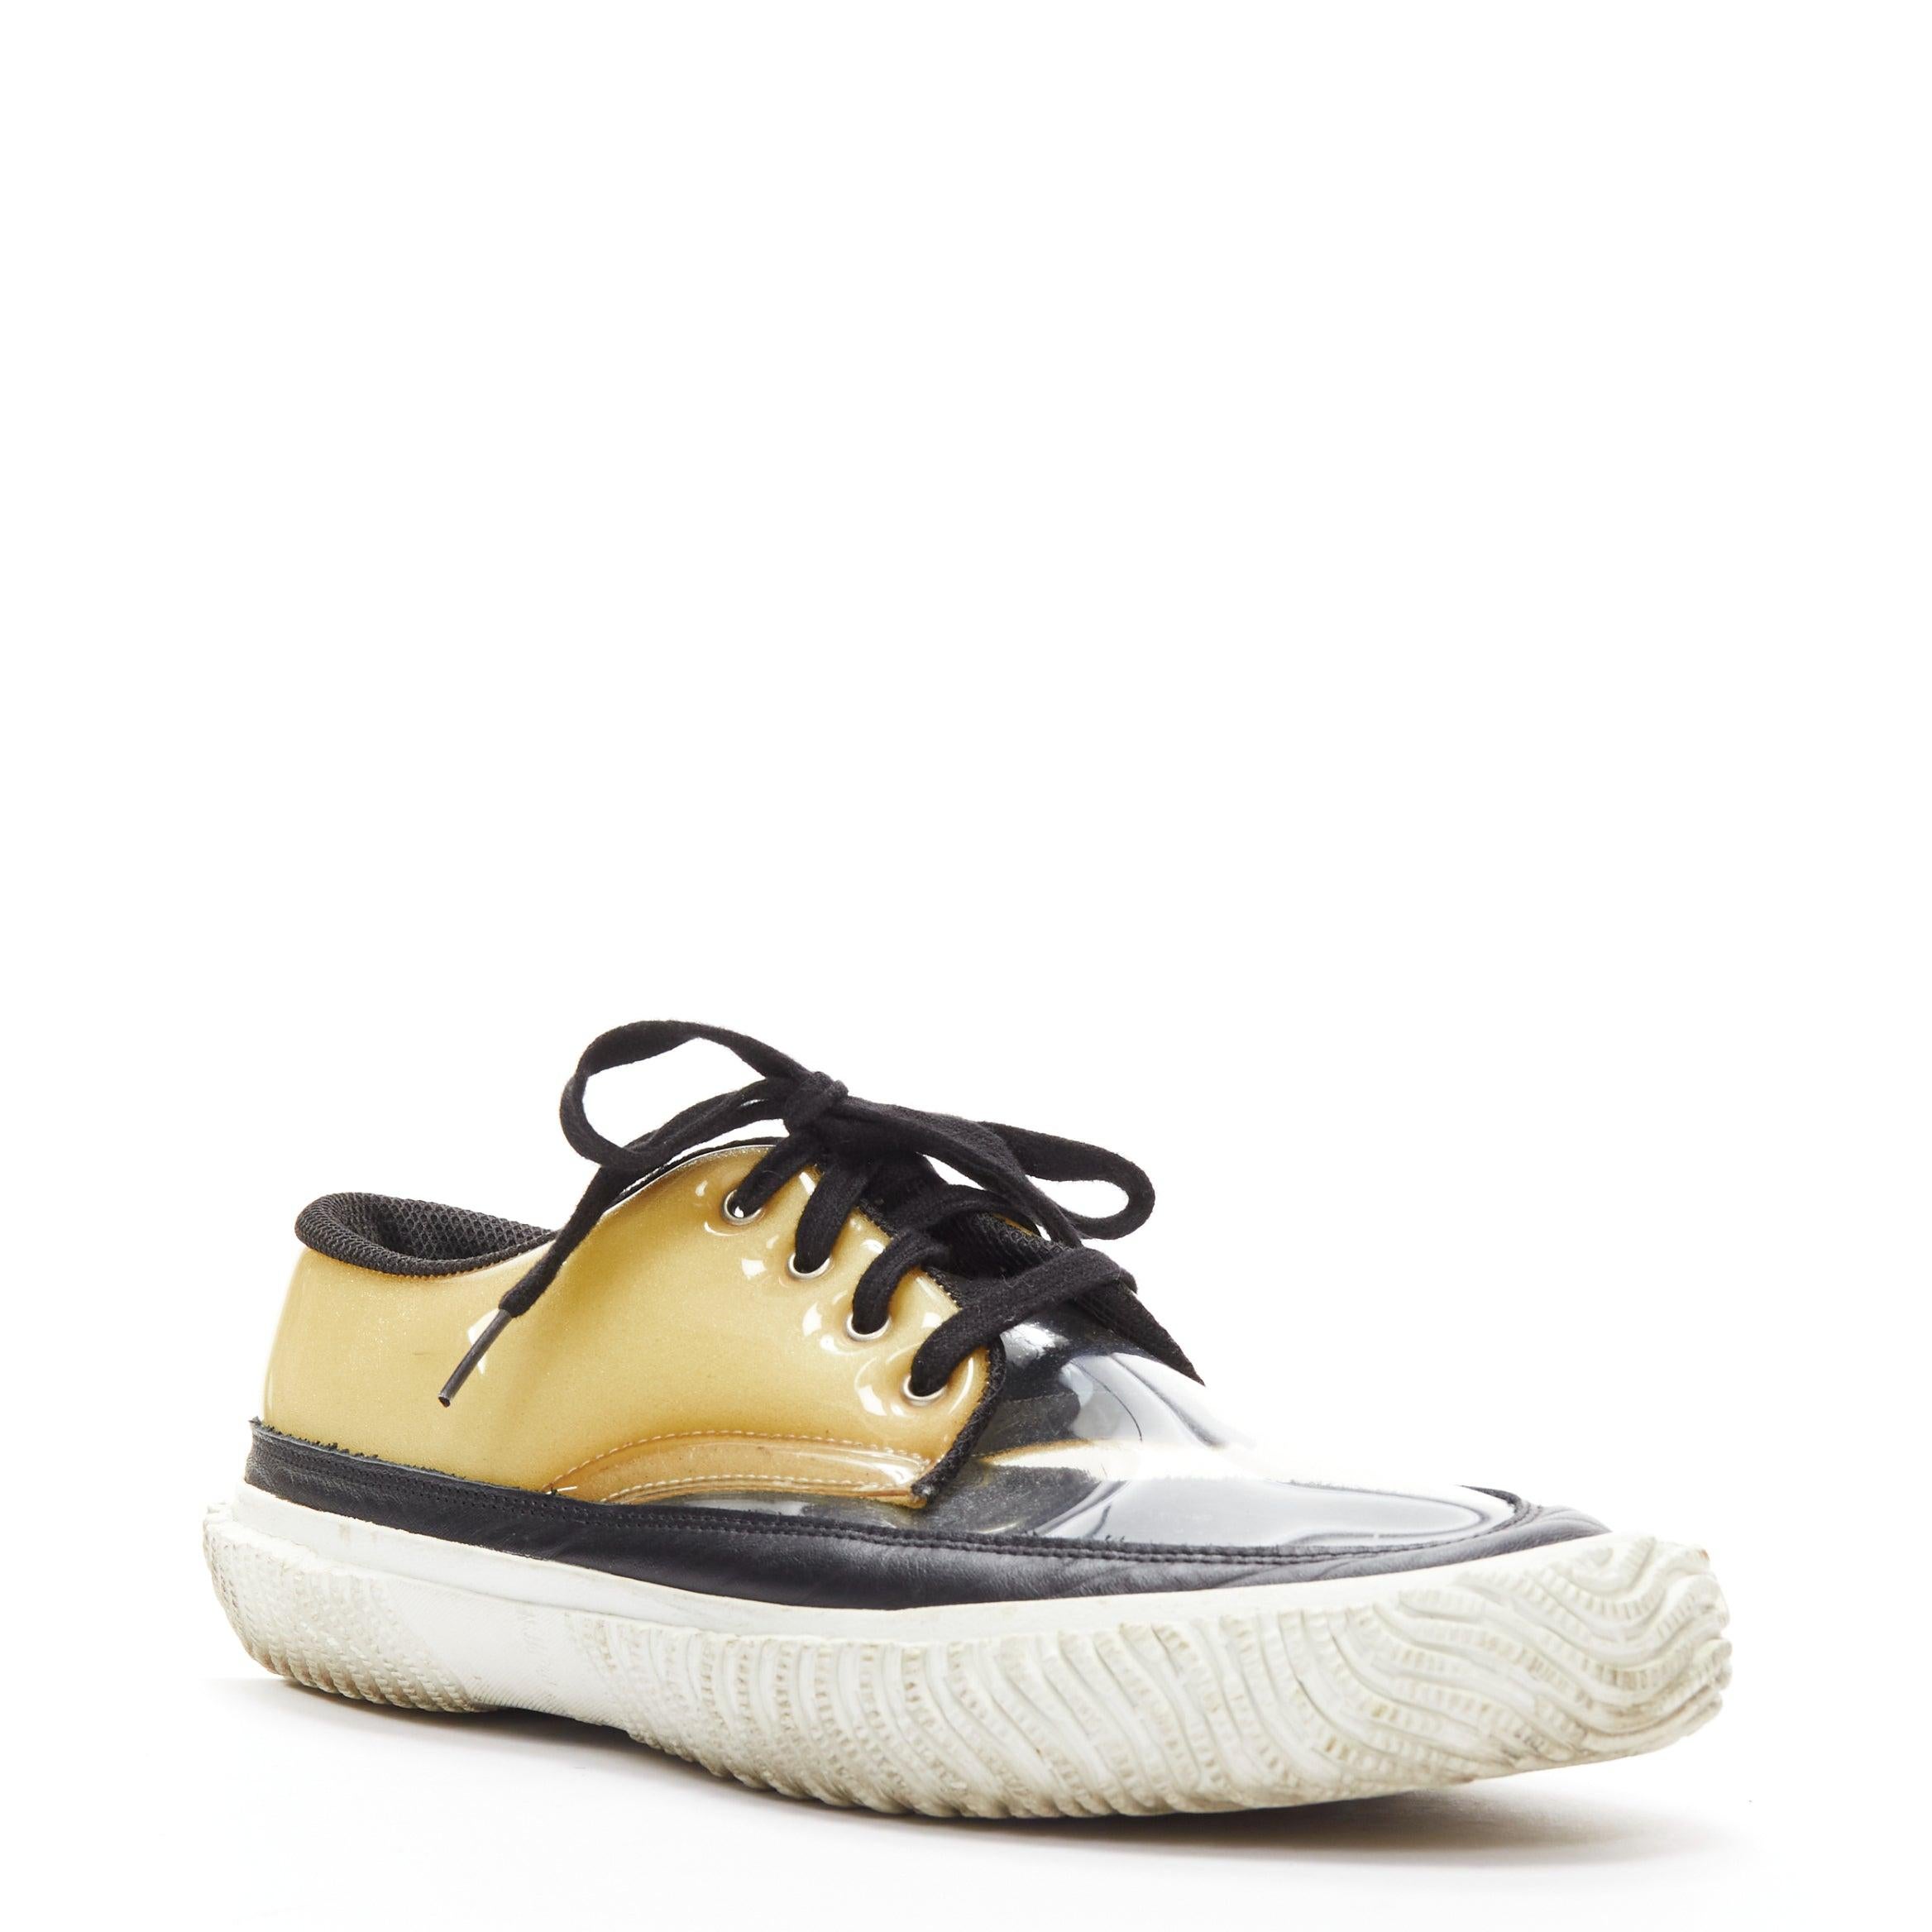 COMME DES GARCONS HOMME PLUS Switching clear beige PVC foam sneakers EU42
Reference: KNCN/A00054
Brand: Comme Des Garcons
Model: Switching
Collection: HOMME PLUS
Material: PVC, Foam, Rubber
Color: Clear, Yellow
Pattern: Solid
Closure: Lace